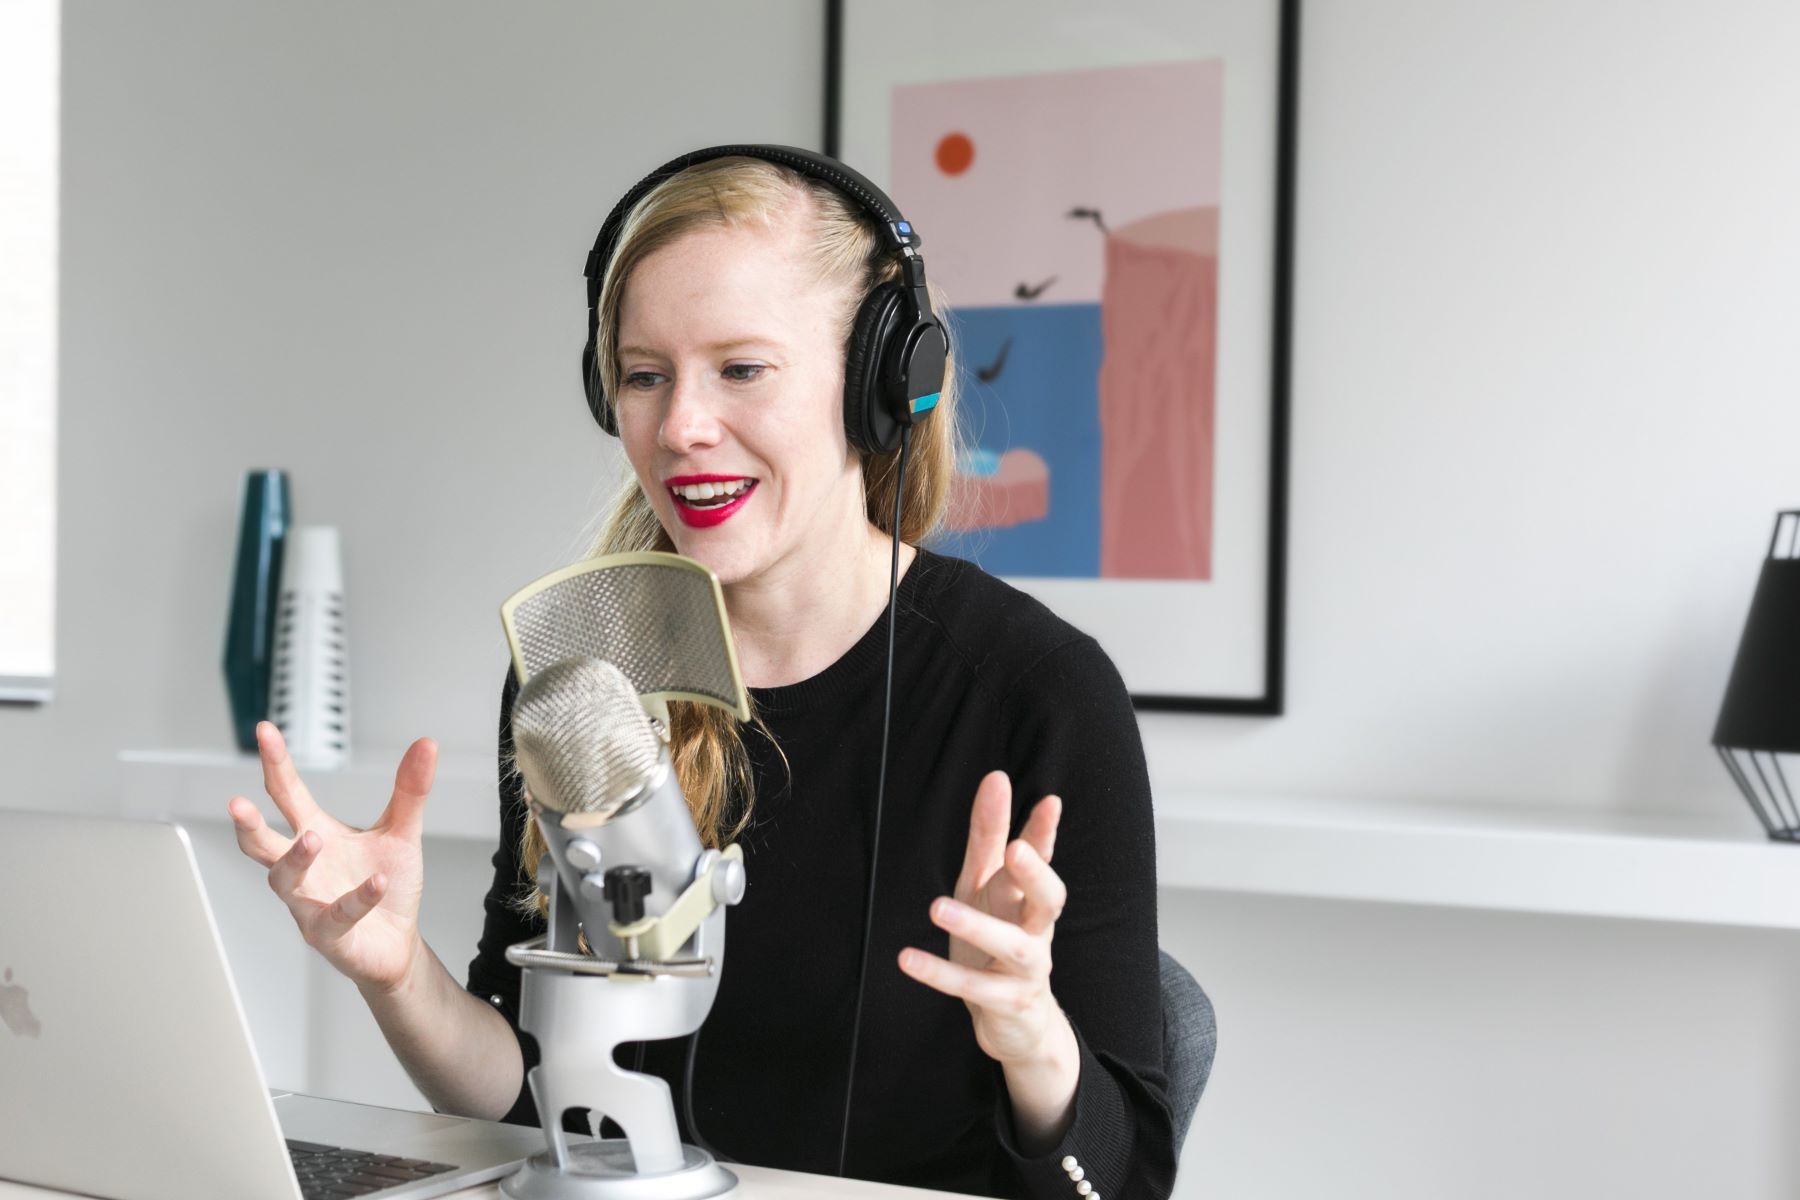 How To Make Money From Podcast On Spotify